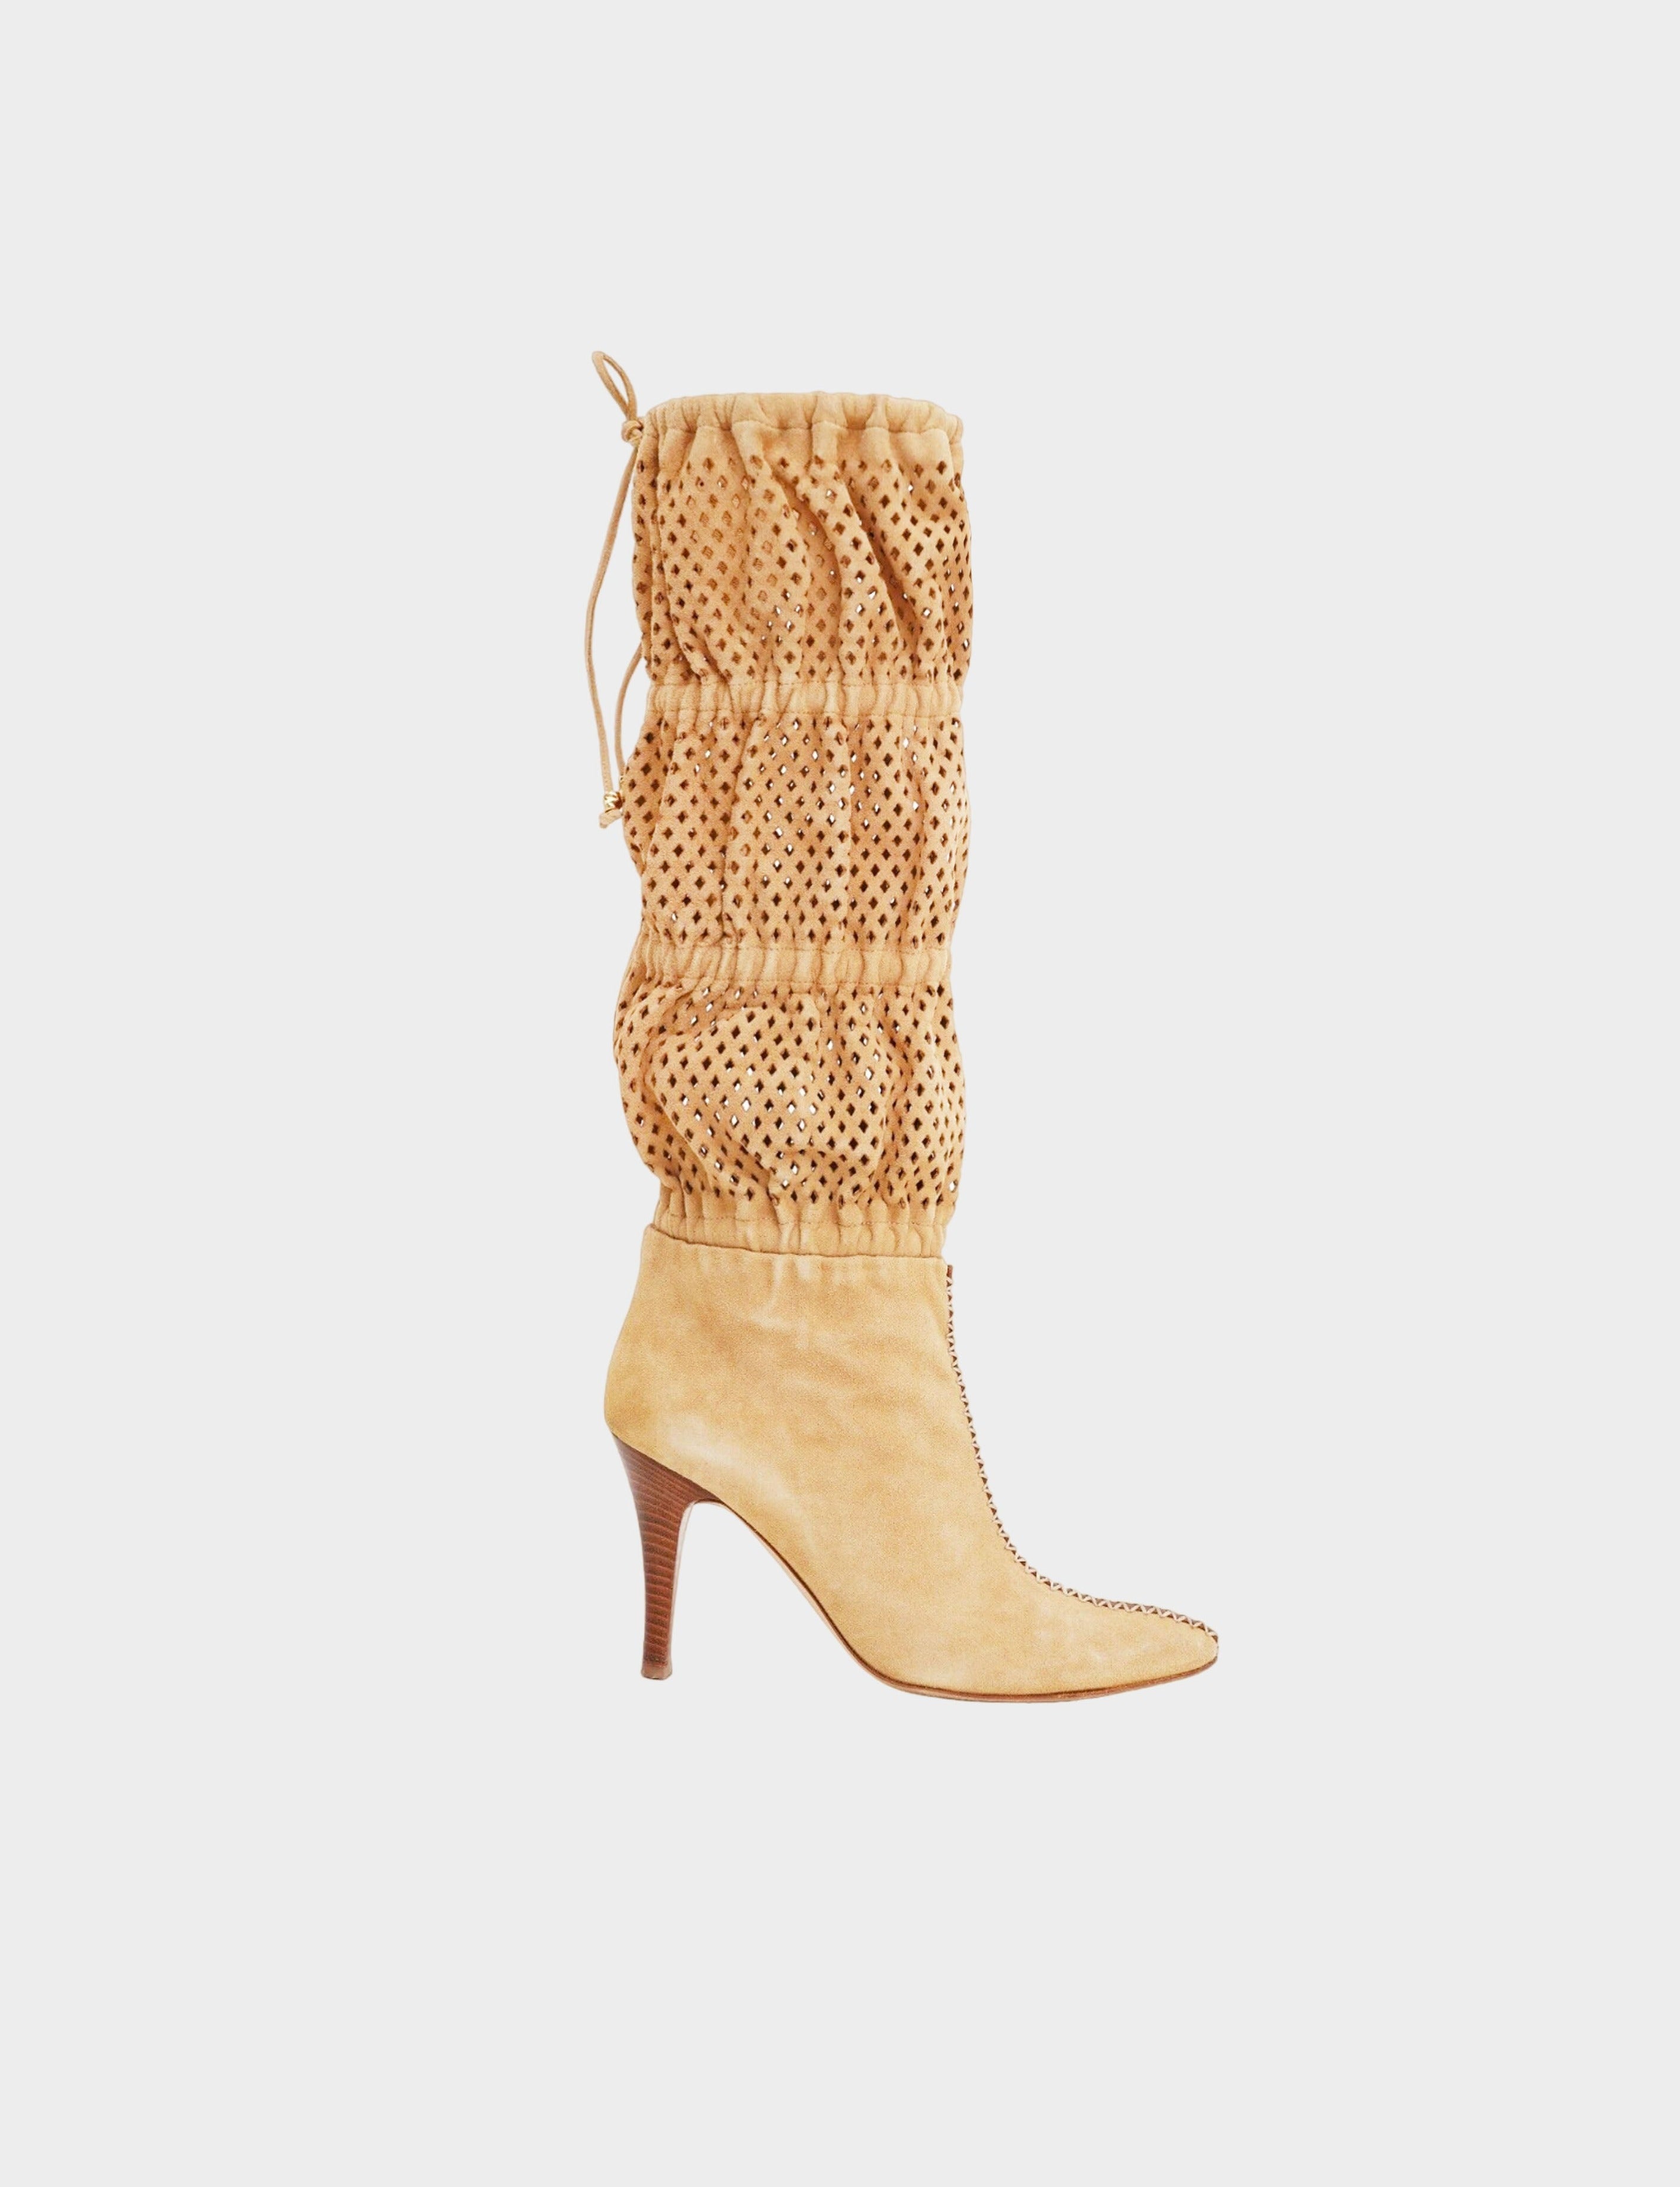 Roberto Cavalli 2000s Beige Perforated Knee Length Suede Boots